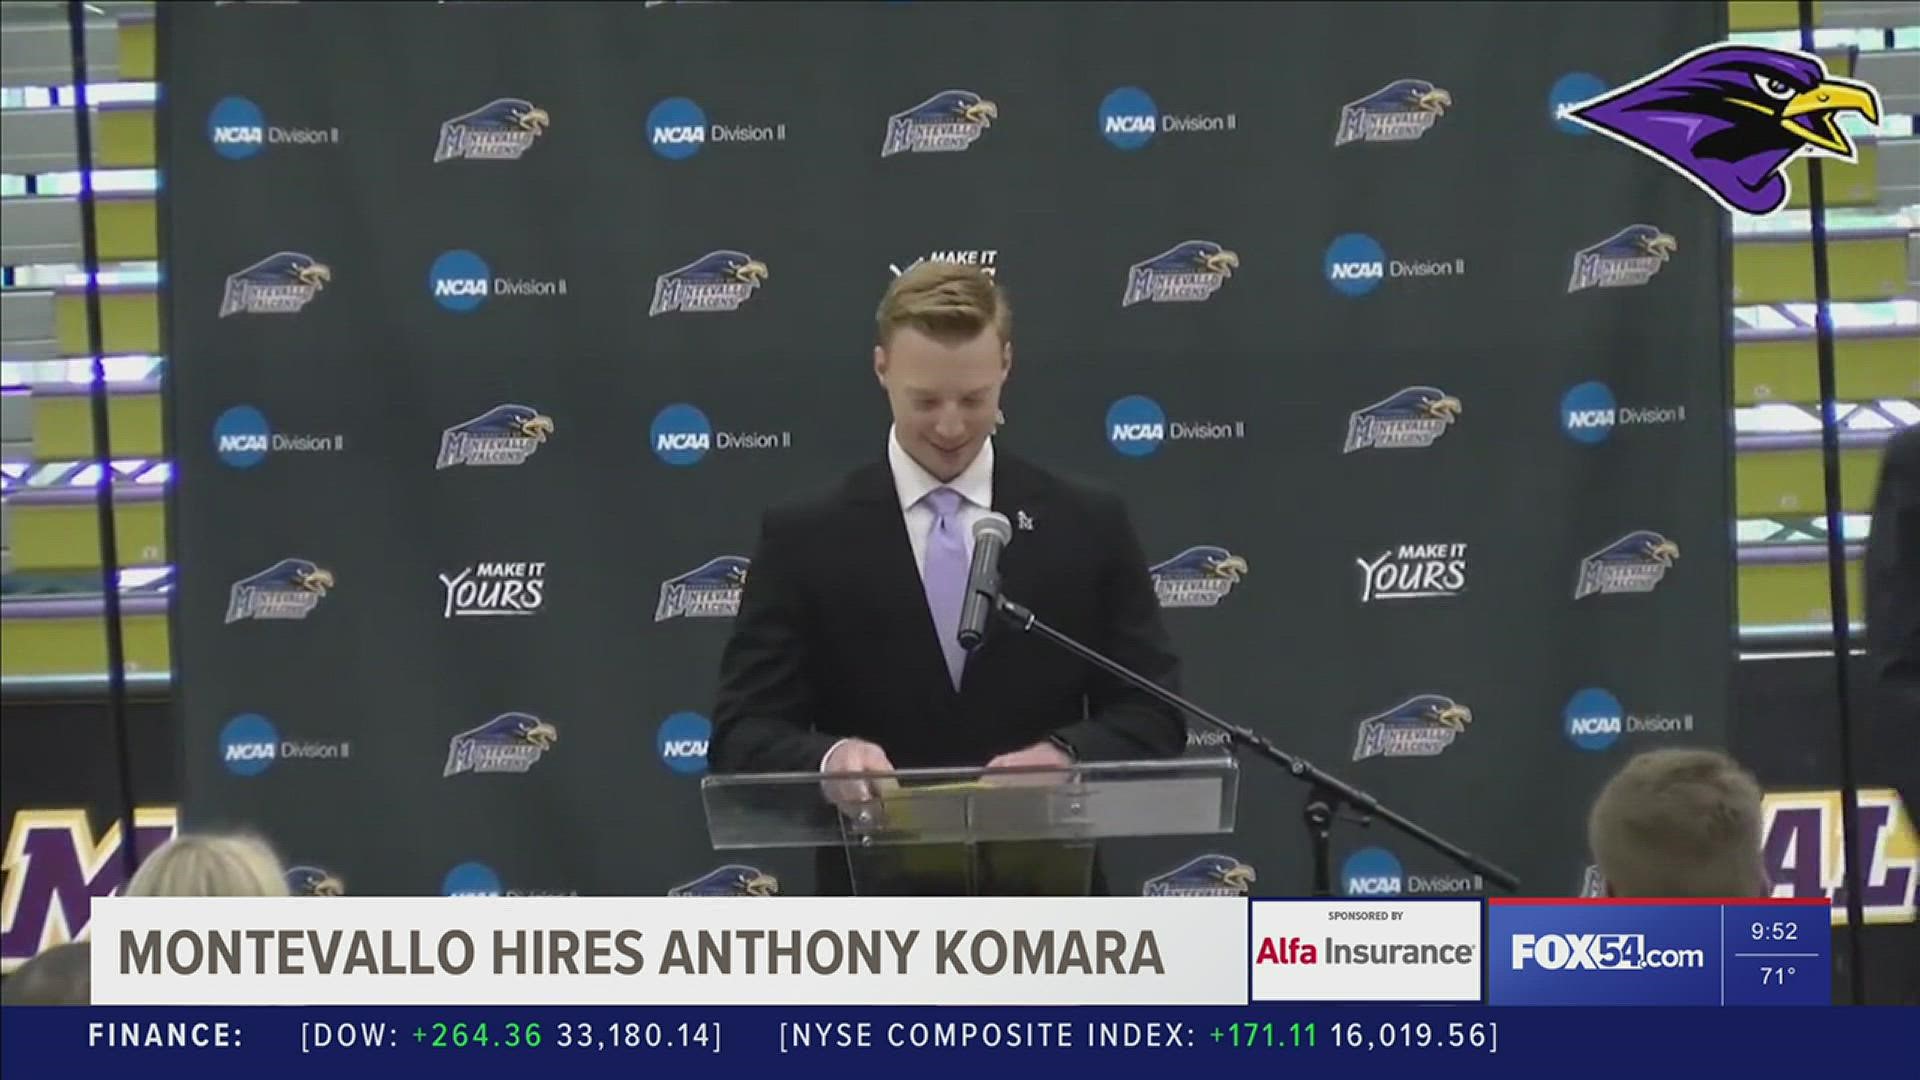 A new era in men's college basketball at the University of Montevallo began on Tuesday with the introduction of new head coach Anthony Komara.